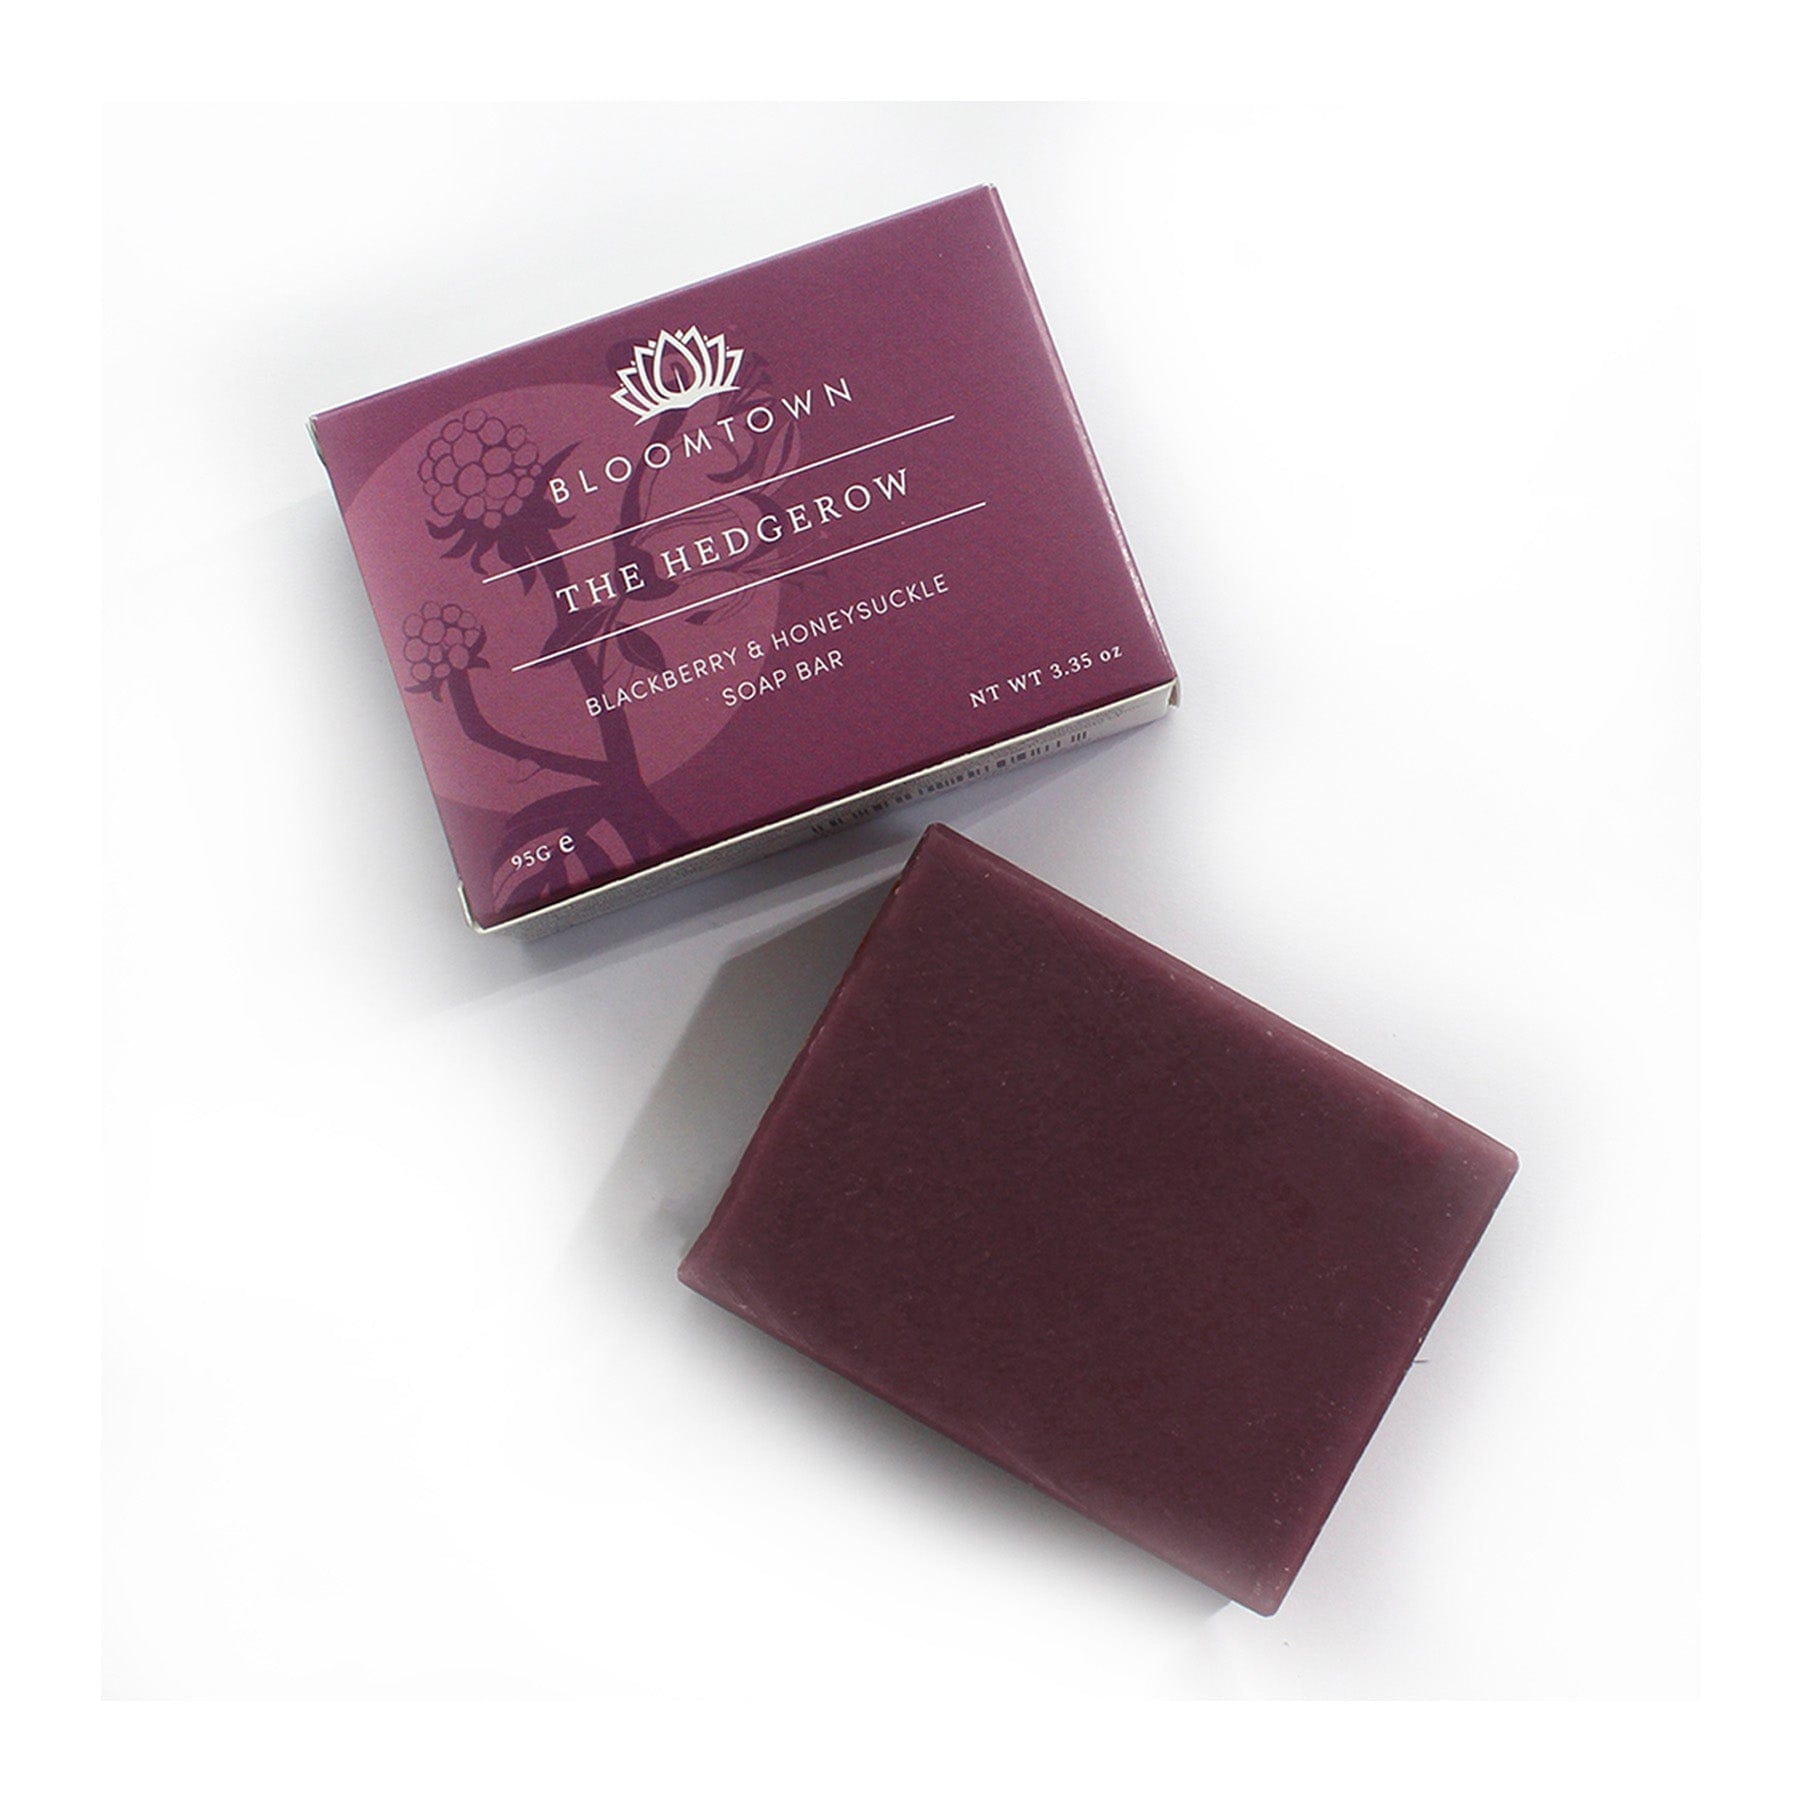 Bloomtown The Hedgerow blackberry and honeysuckle soap bar with packaging on white background